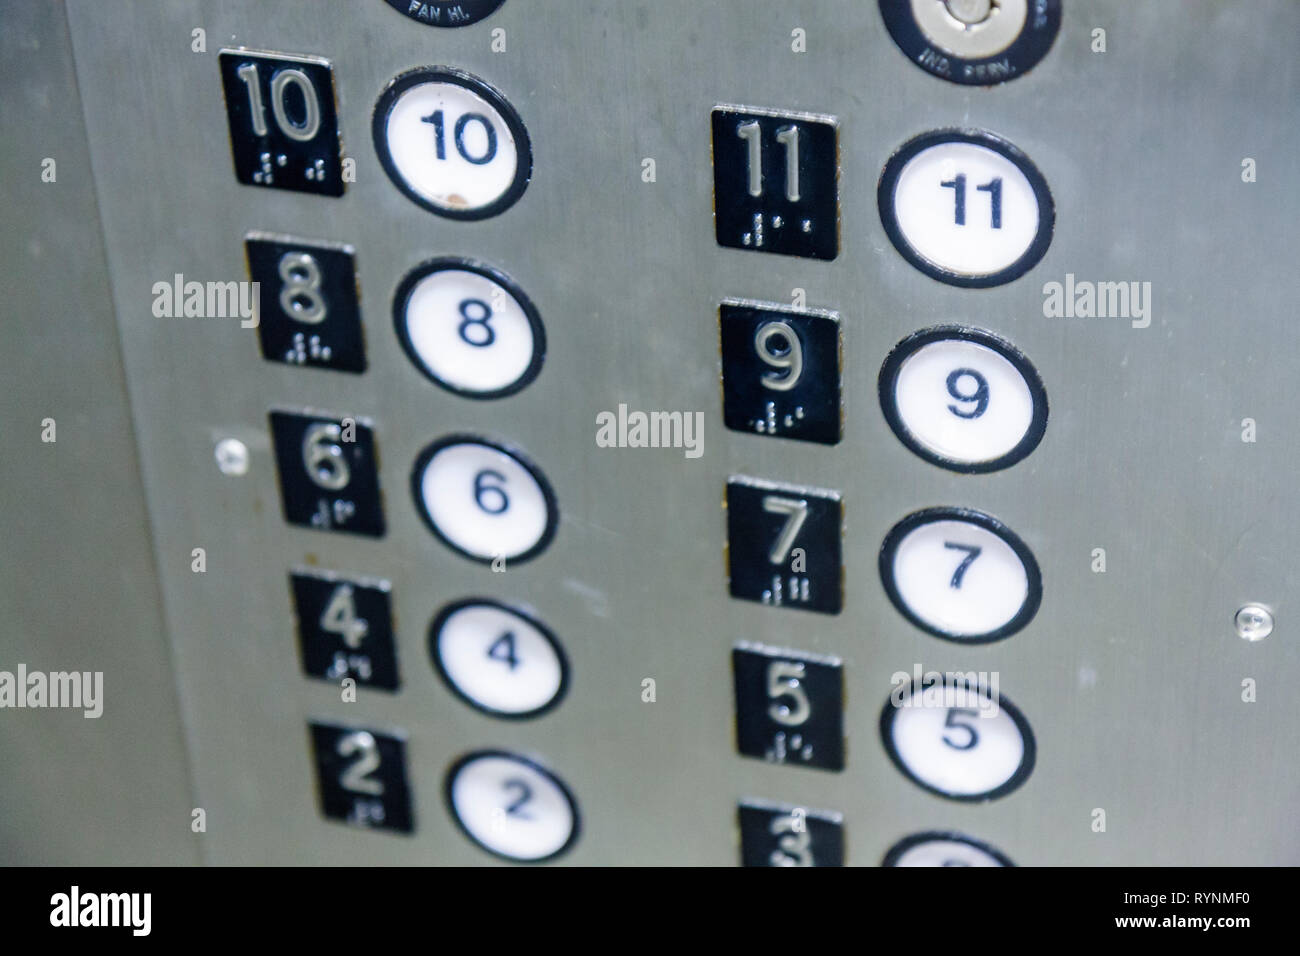 Elevator Numbers Stock Photos Elevator Numbers Stock Images Alamy